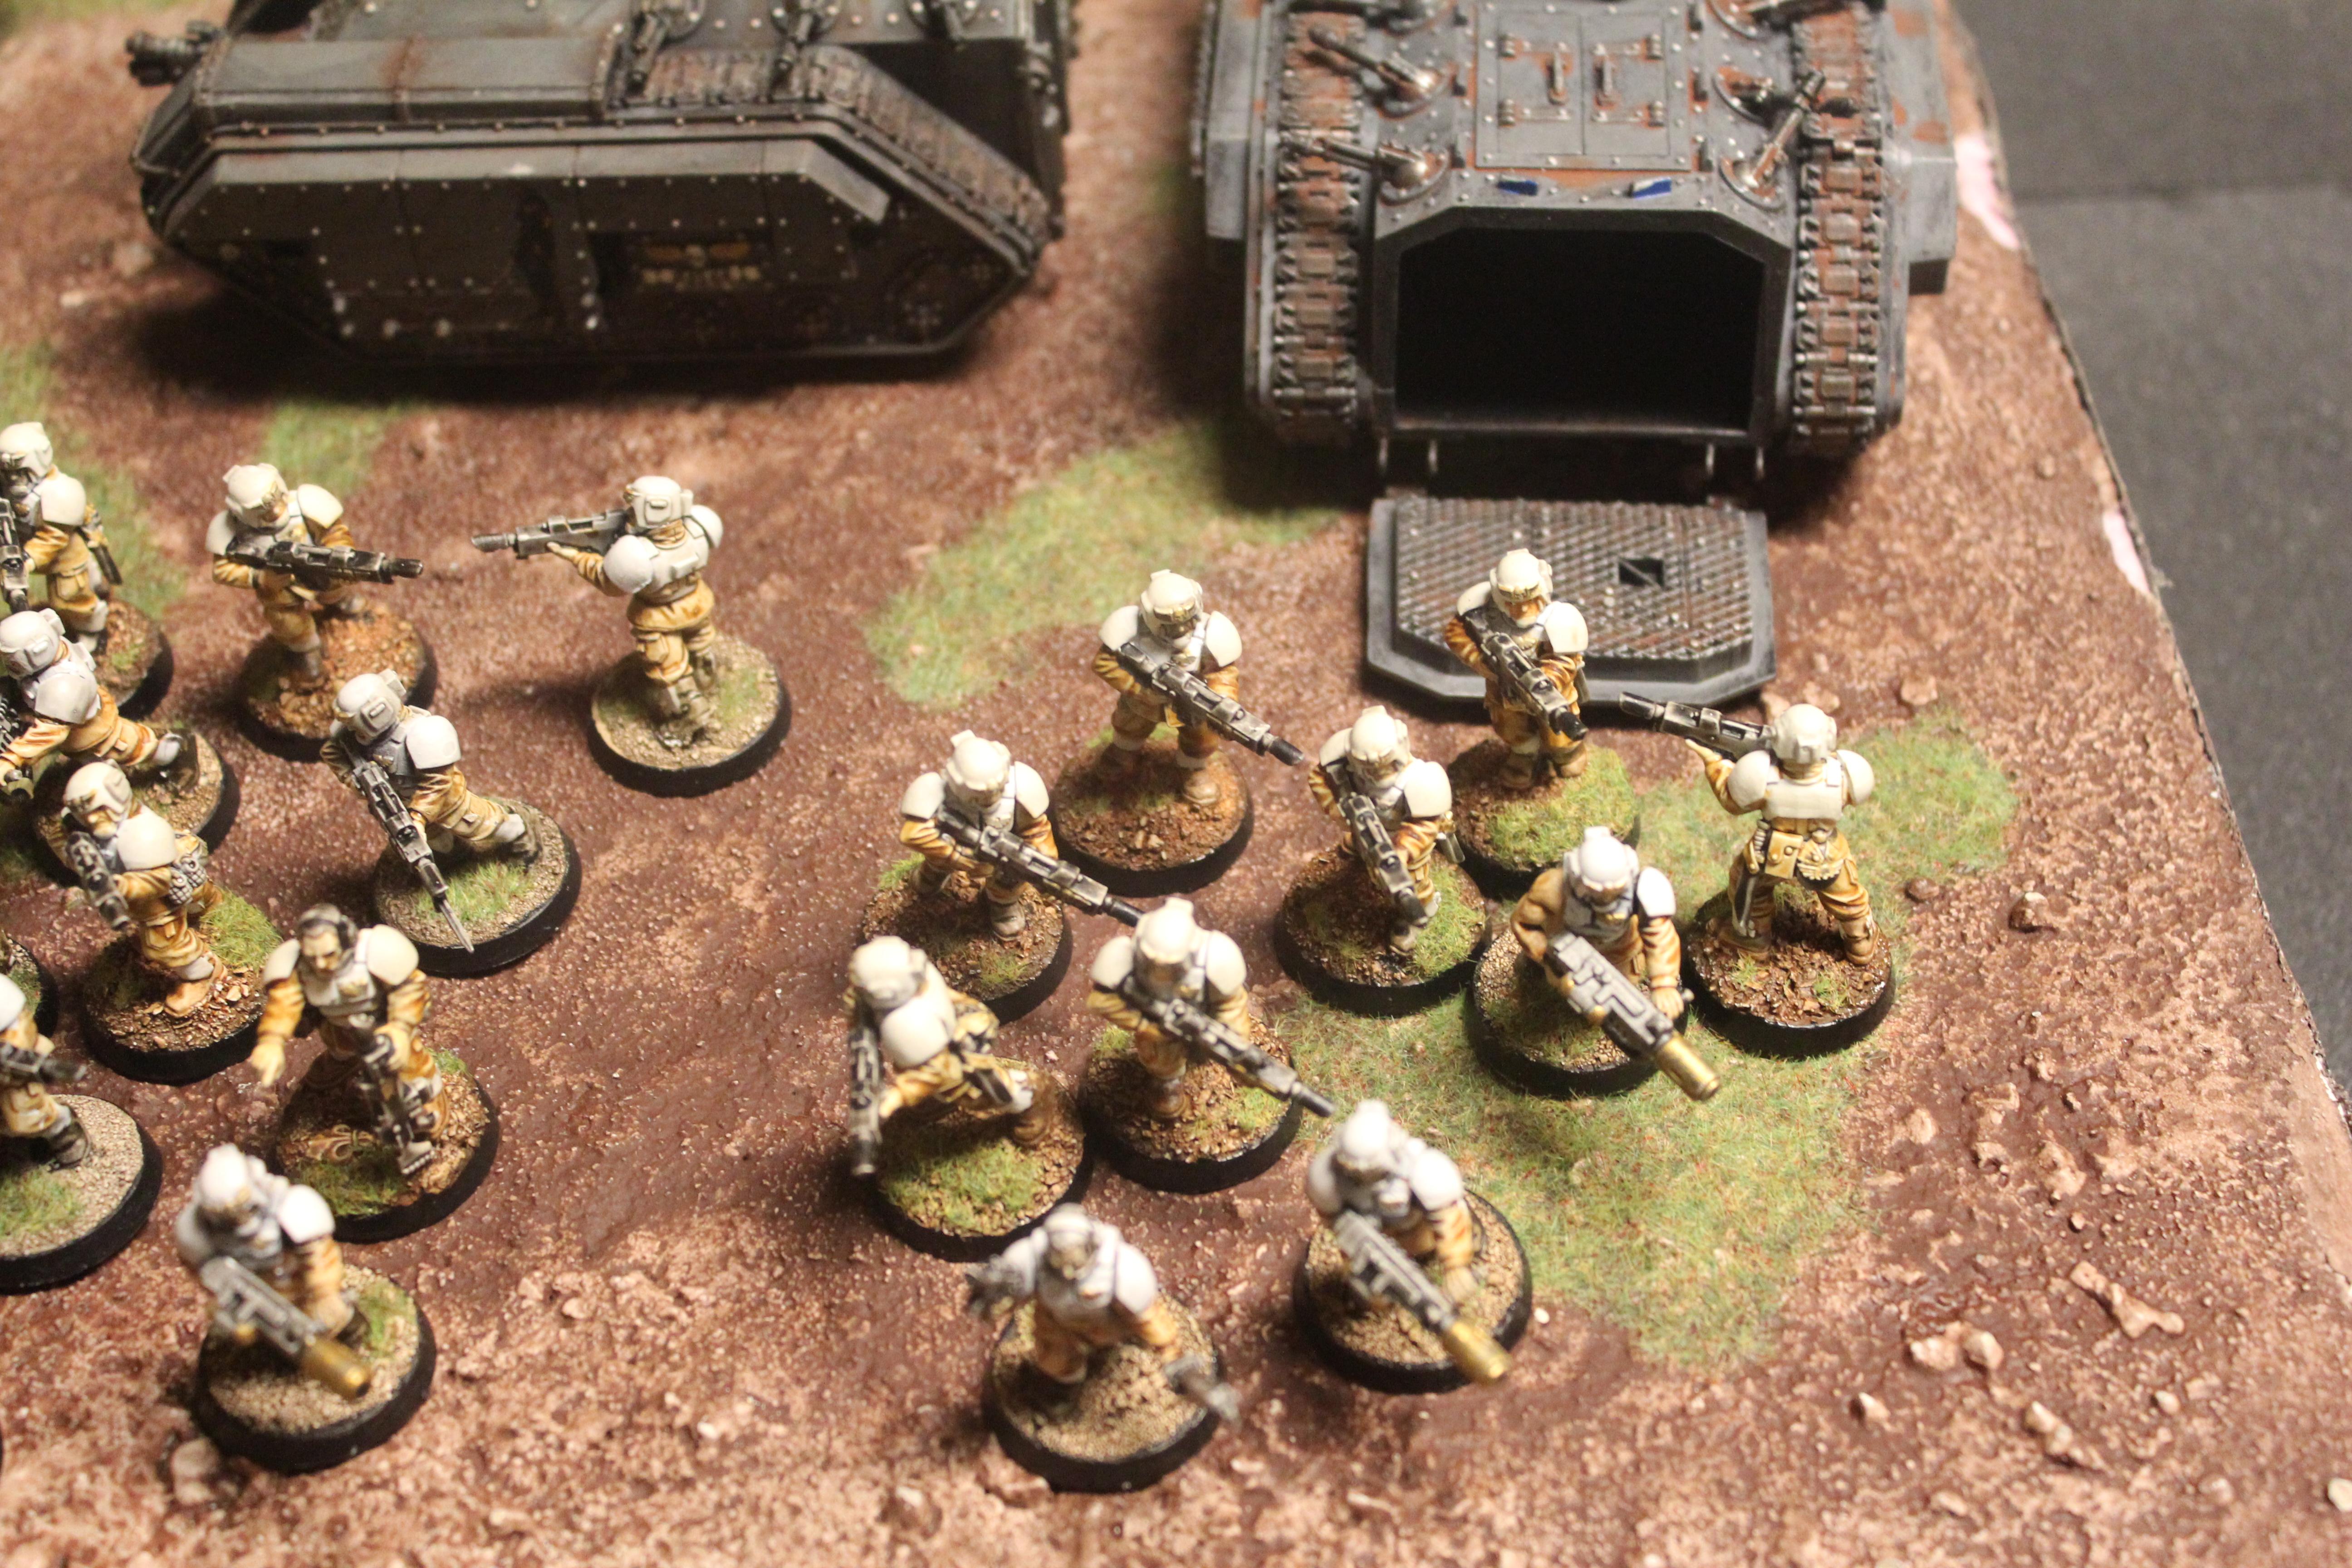 Colonial Gt 2012 Kirika's Asgard 501st Imperial Guard Pic 001 Chimeras + Infantry Squad